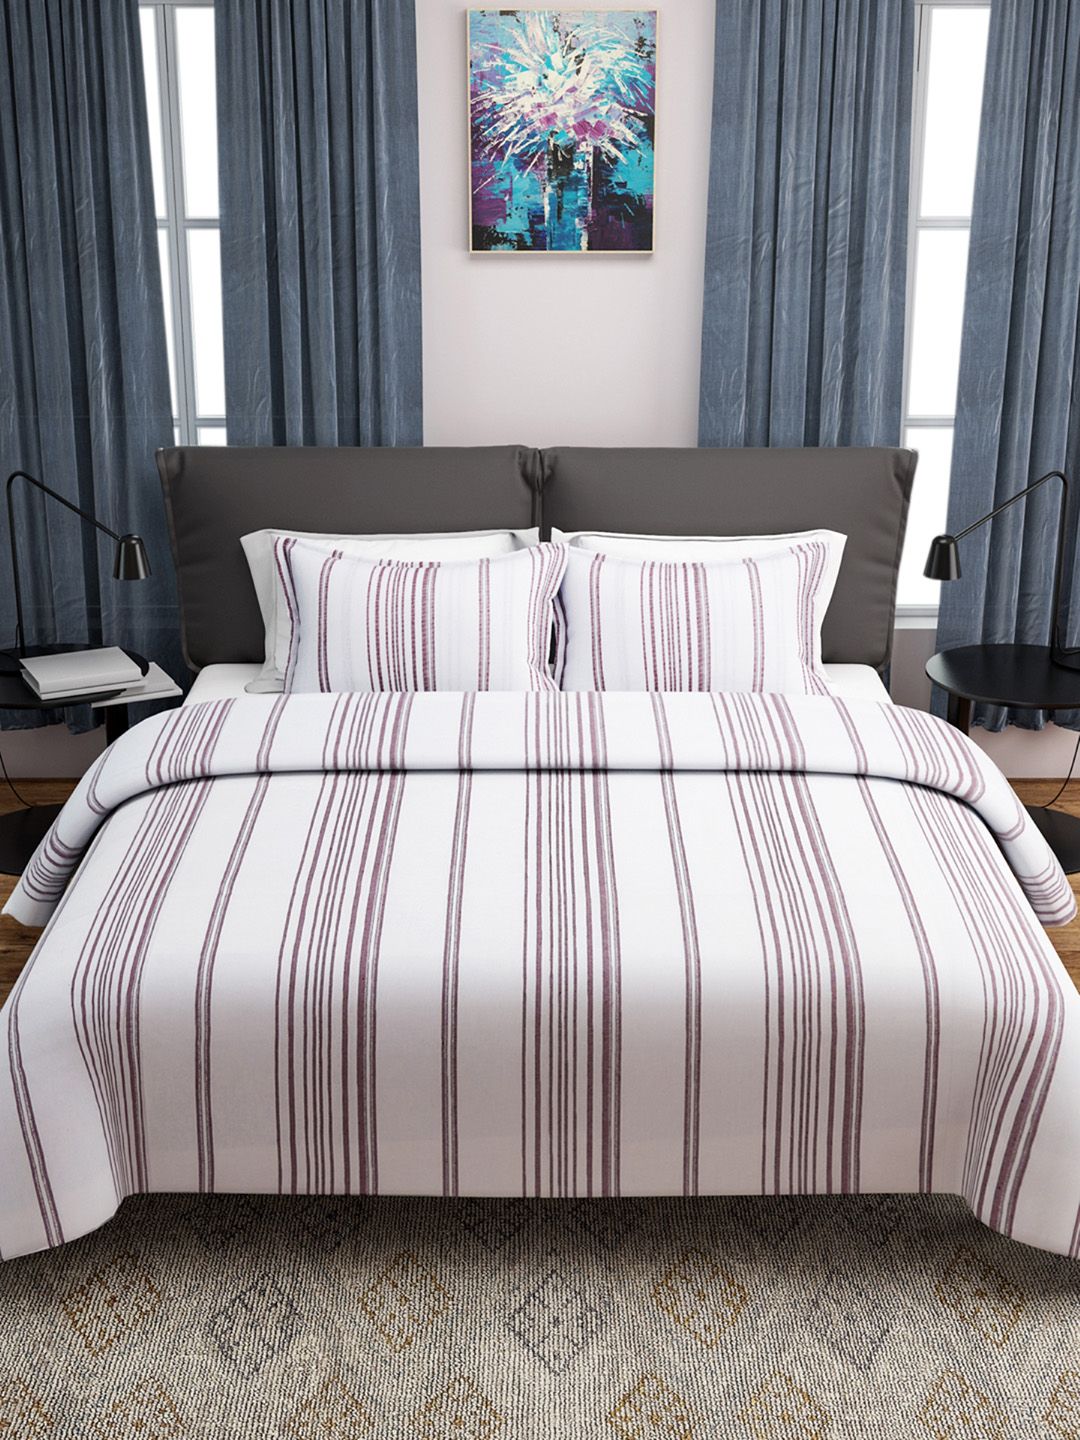 ROMEE Maroon & White Striped Double Bed Cover with 2 Pillow Covers Price in India